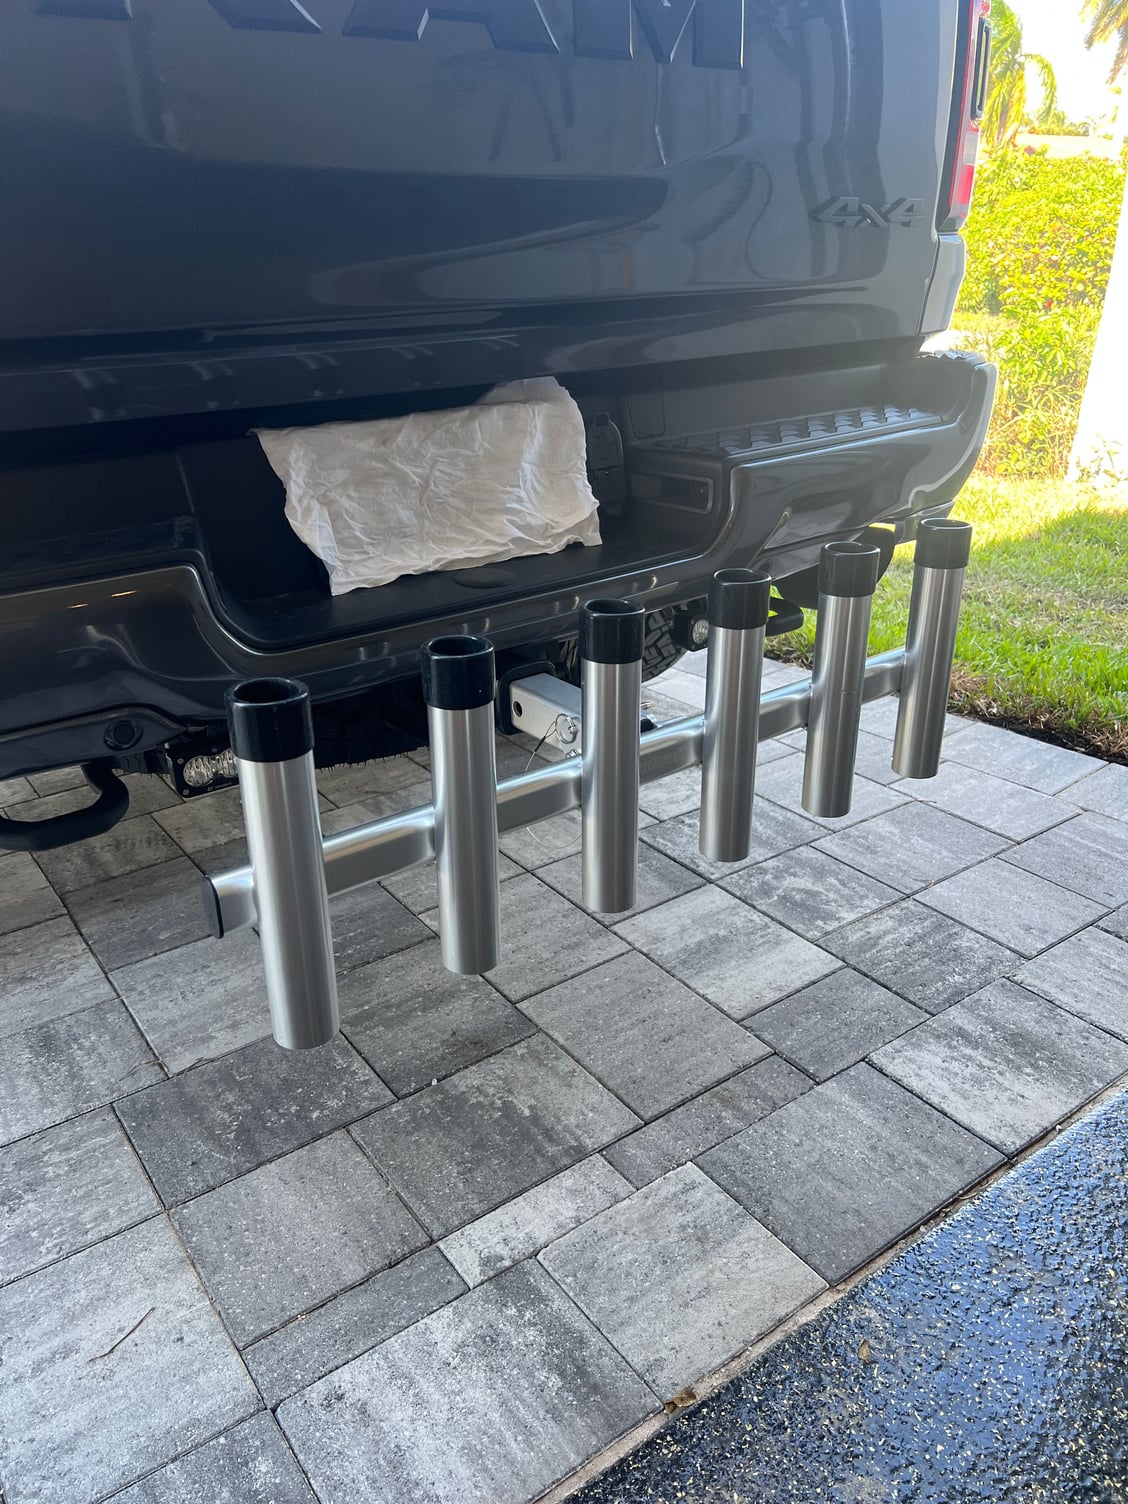 Trailer Hitch Rod Holder - The Hull Truth - Boating and Fishing Forum